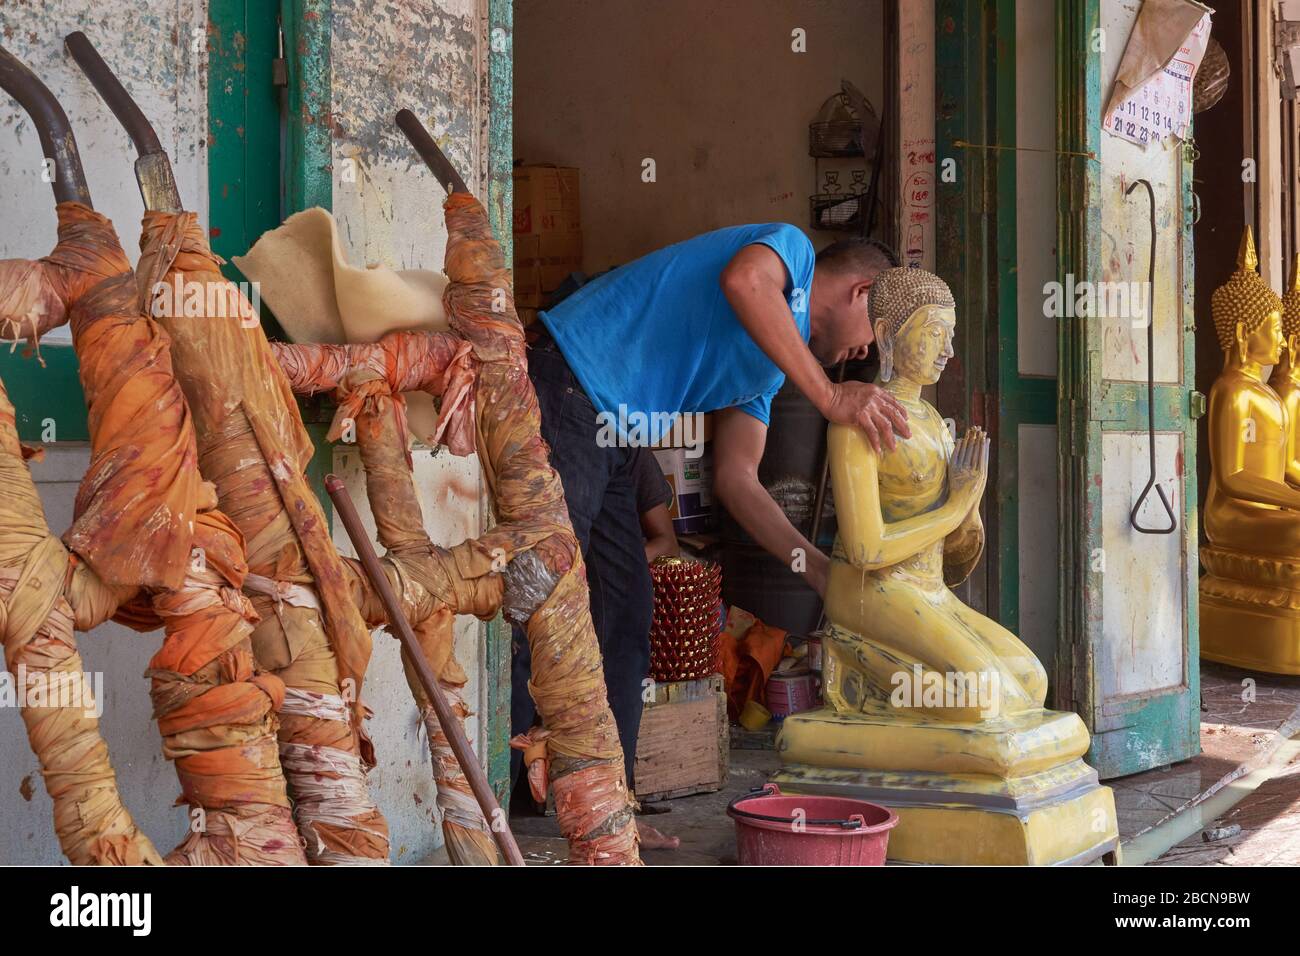 An employee in a factory for Buddha statues in Bamrung Muang Road, Bangkok, Thailand, moves an unfinished statue of a kneeling and praying Buddha Stock Photo